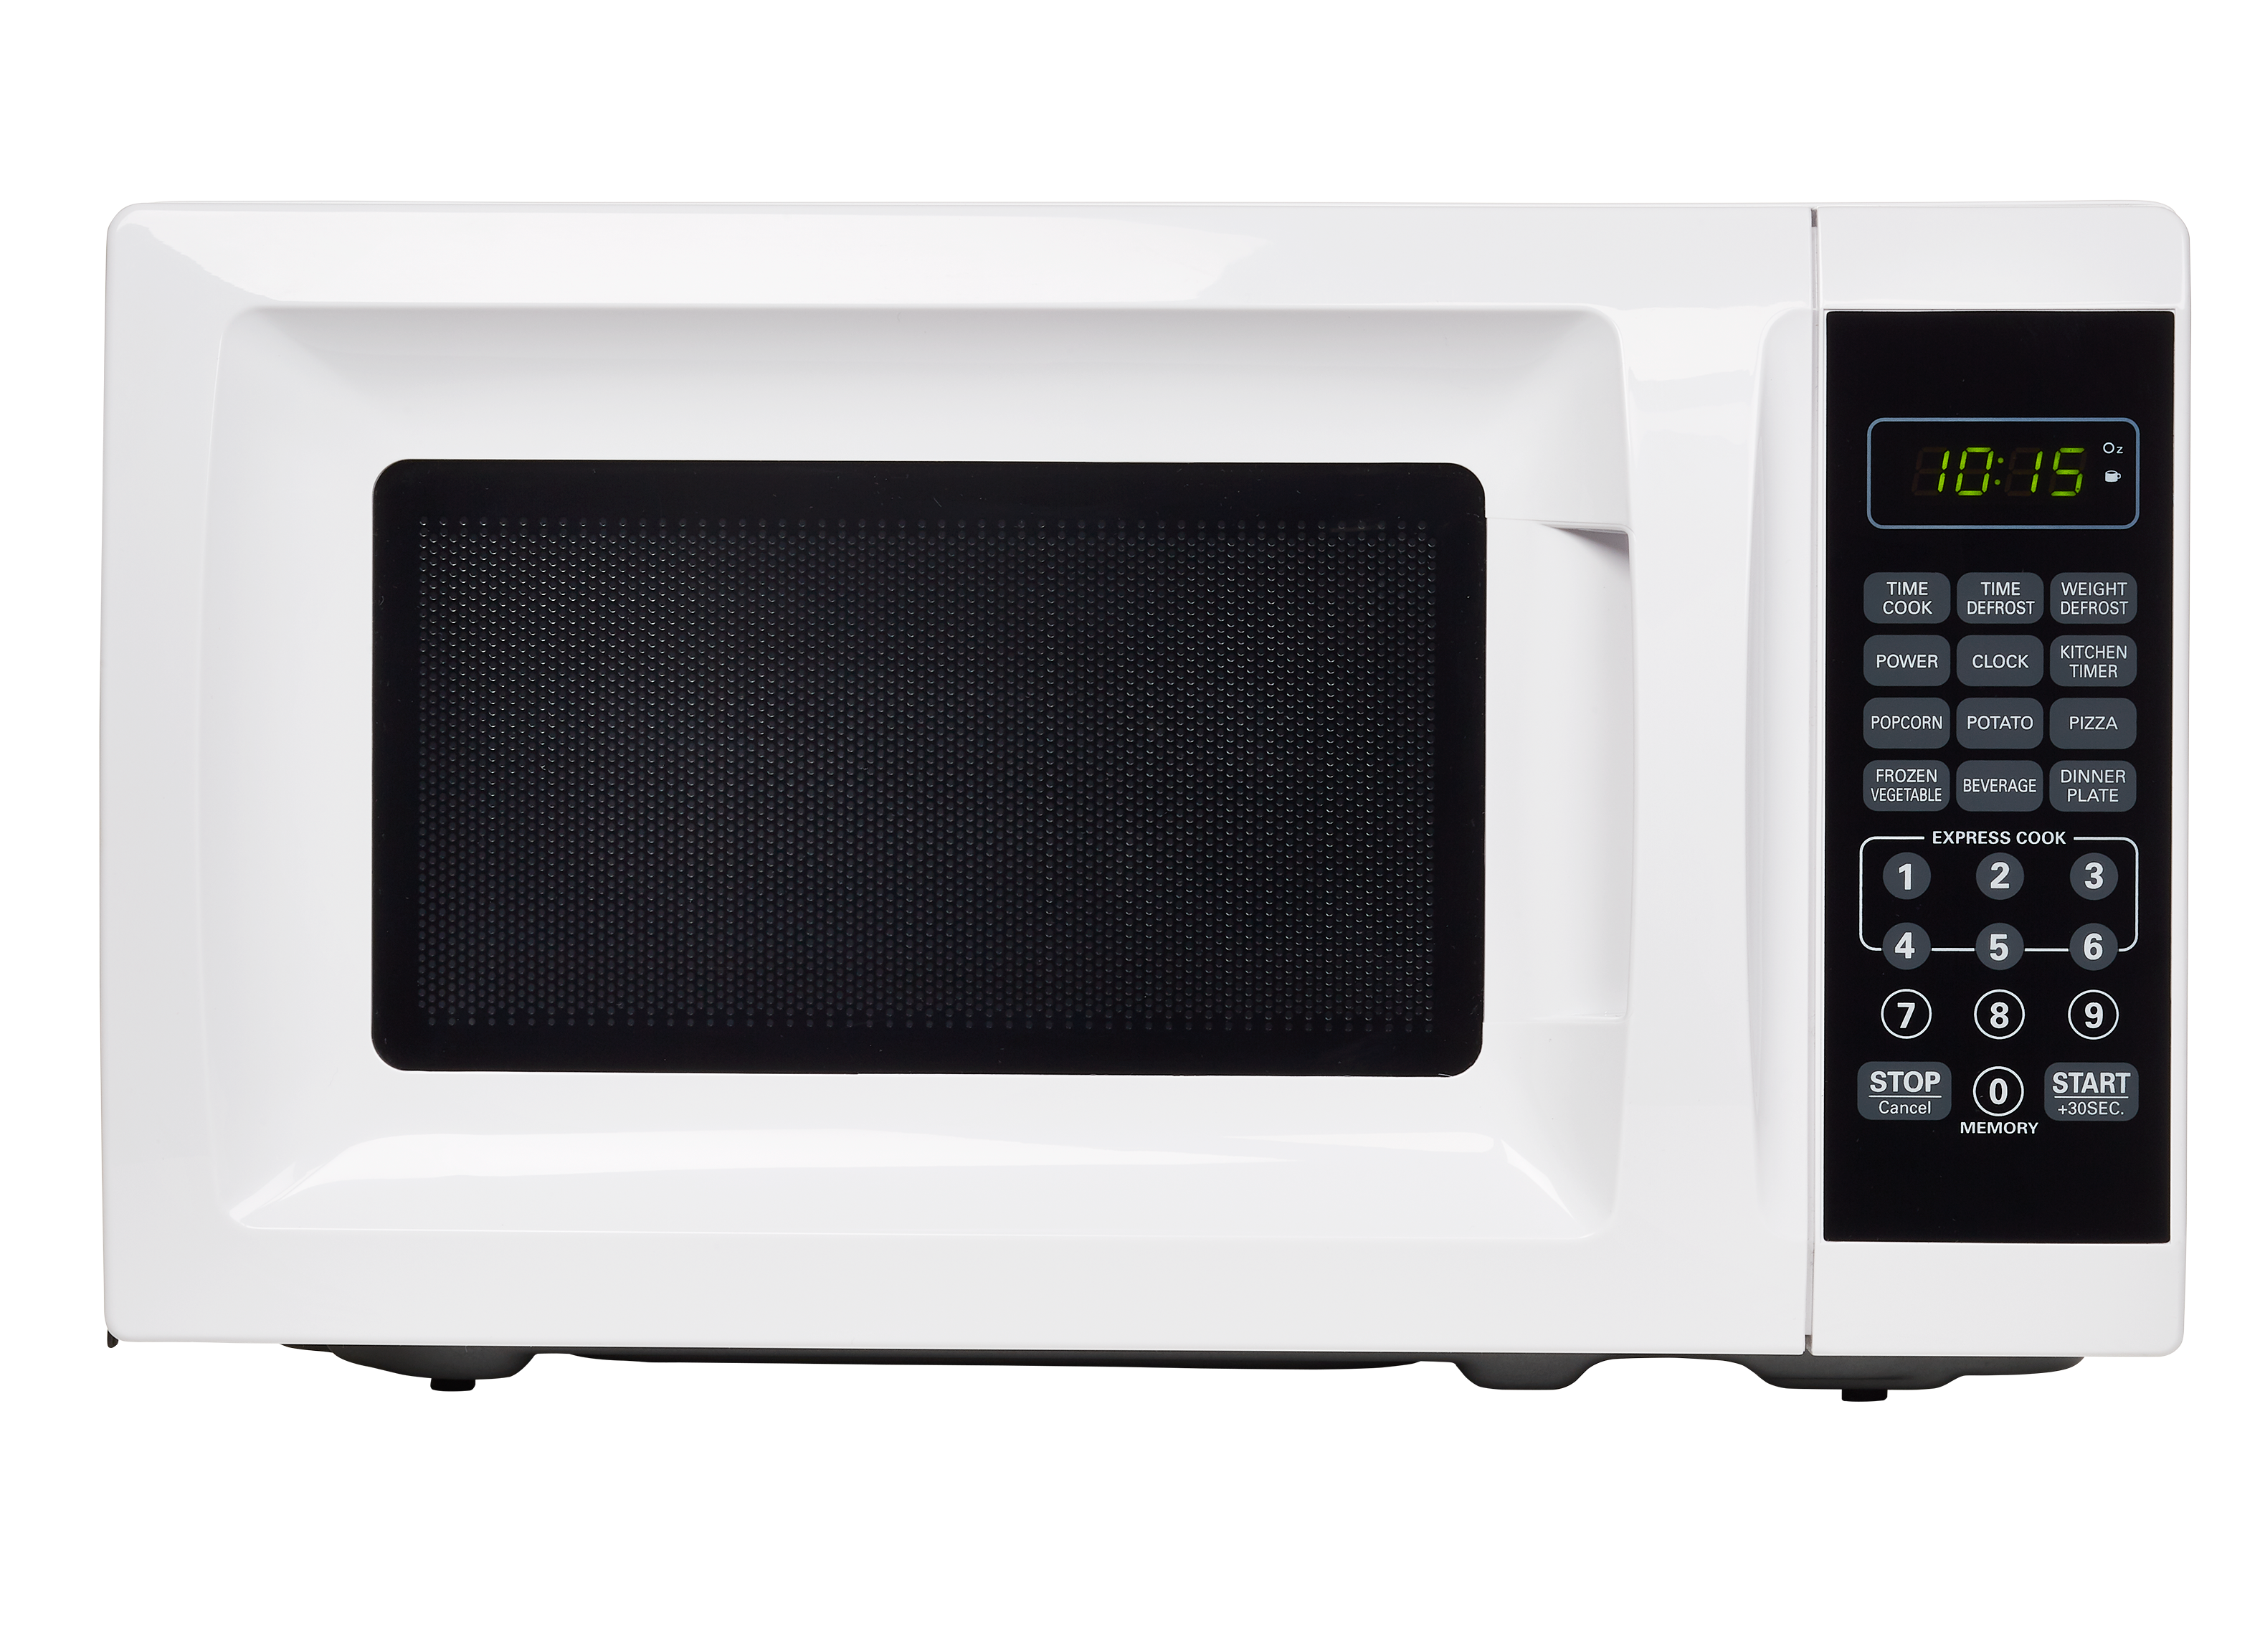 https://crdms.images.consumerreports.org/prod/products/cr/models/394834-small-countertop-microwaves-mainstays-walmart-em720cga-w-59905.png